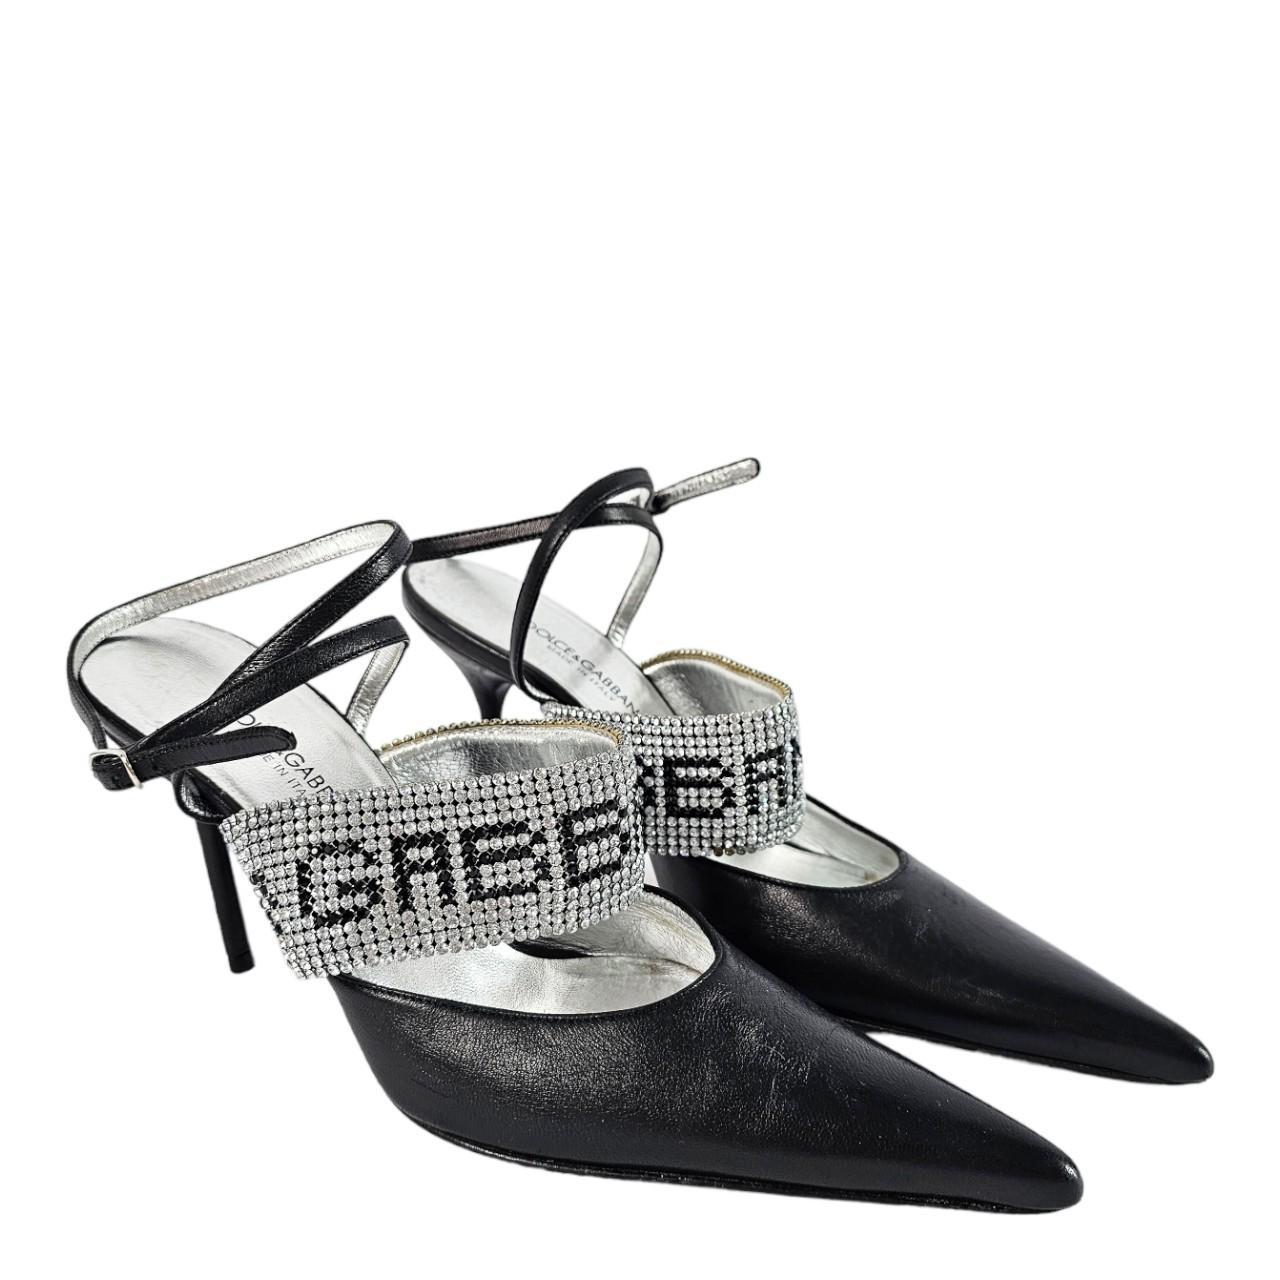 Dolce & Gabbana Women's Black and Silver Courts - 1